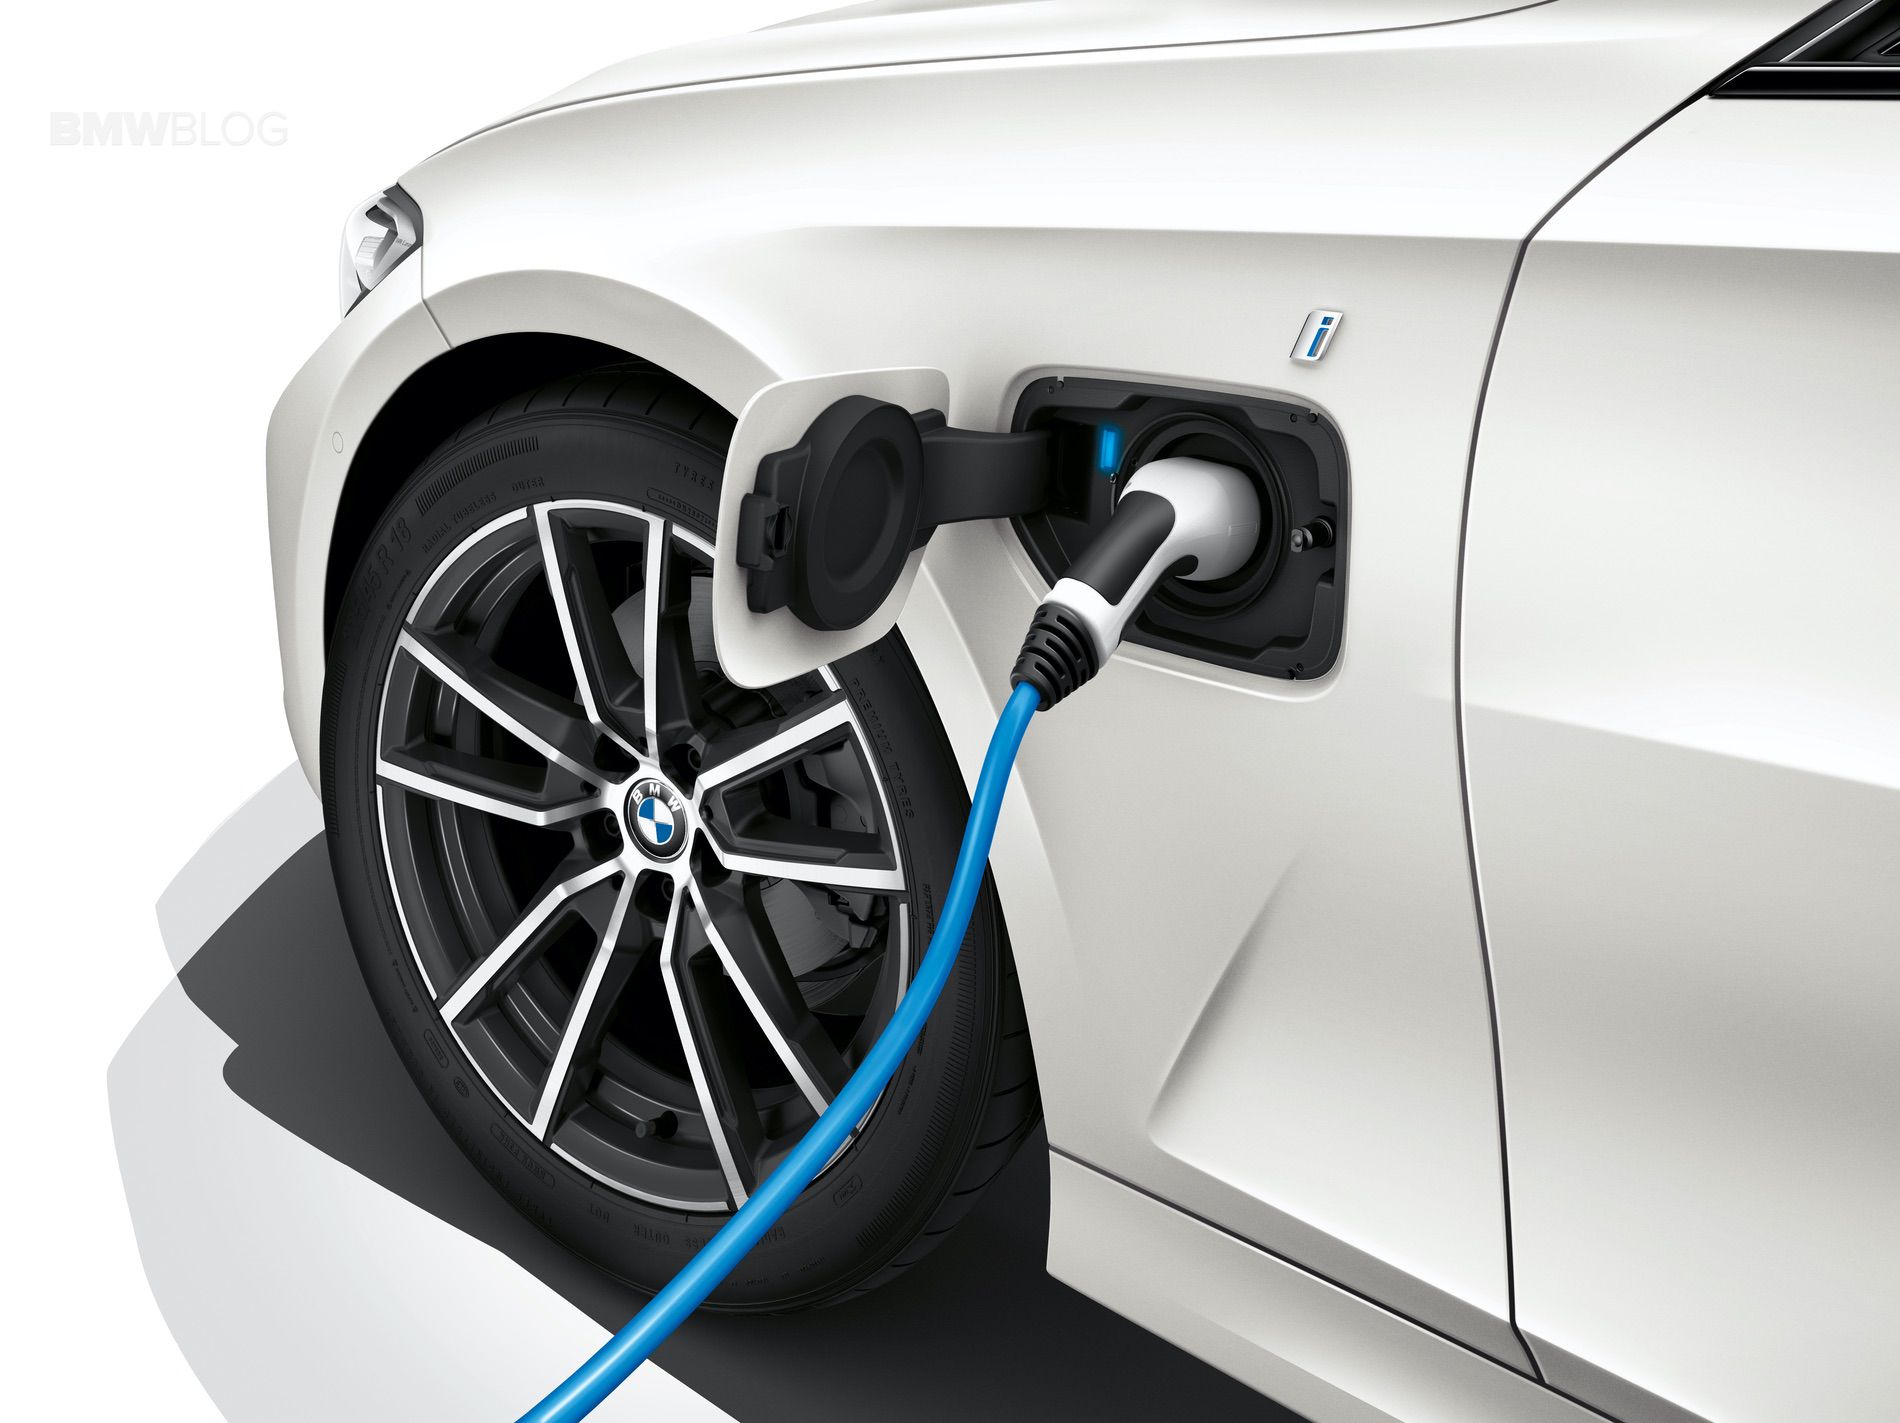 Should I Use 120V Charging for My EV? A Guide on Benefits, Costs & Safety.